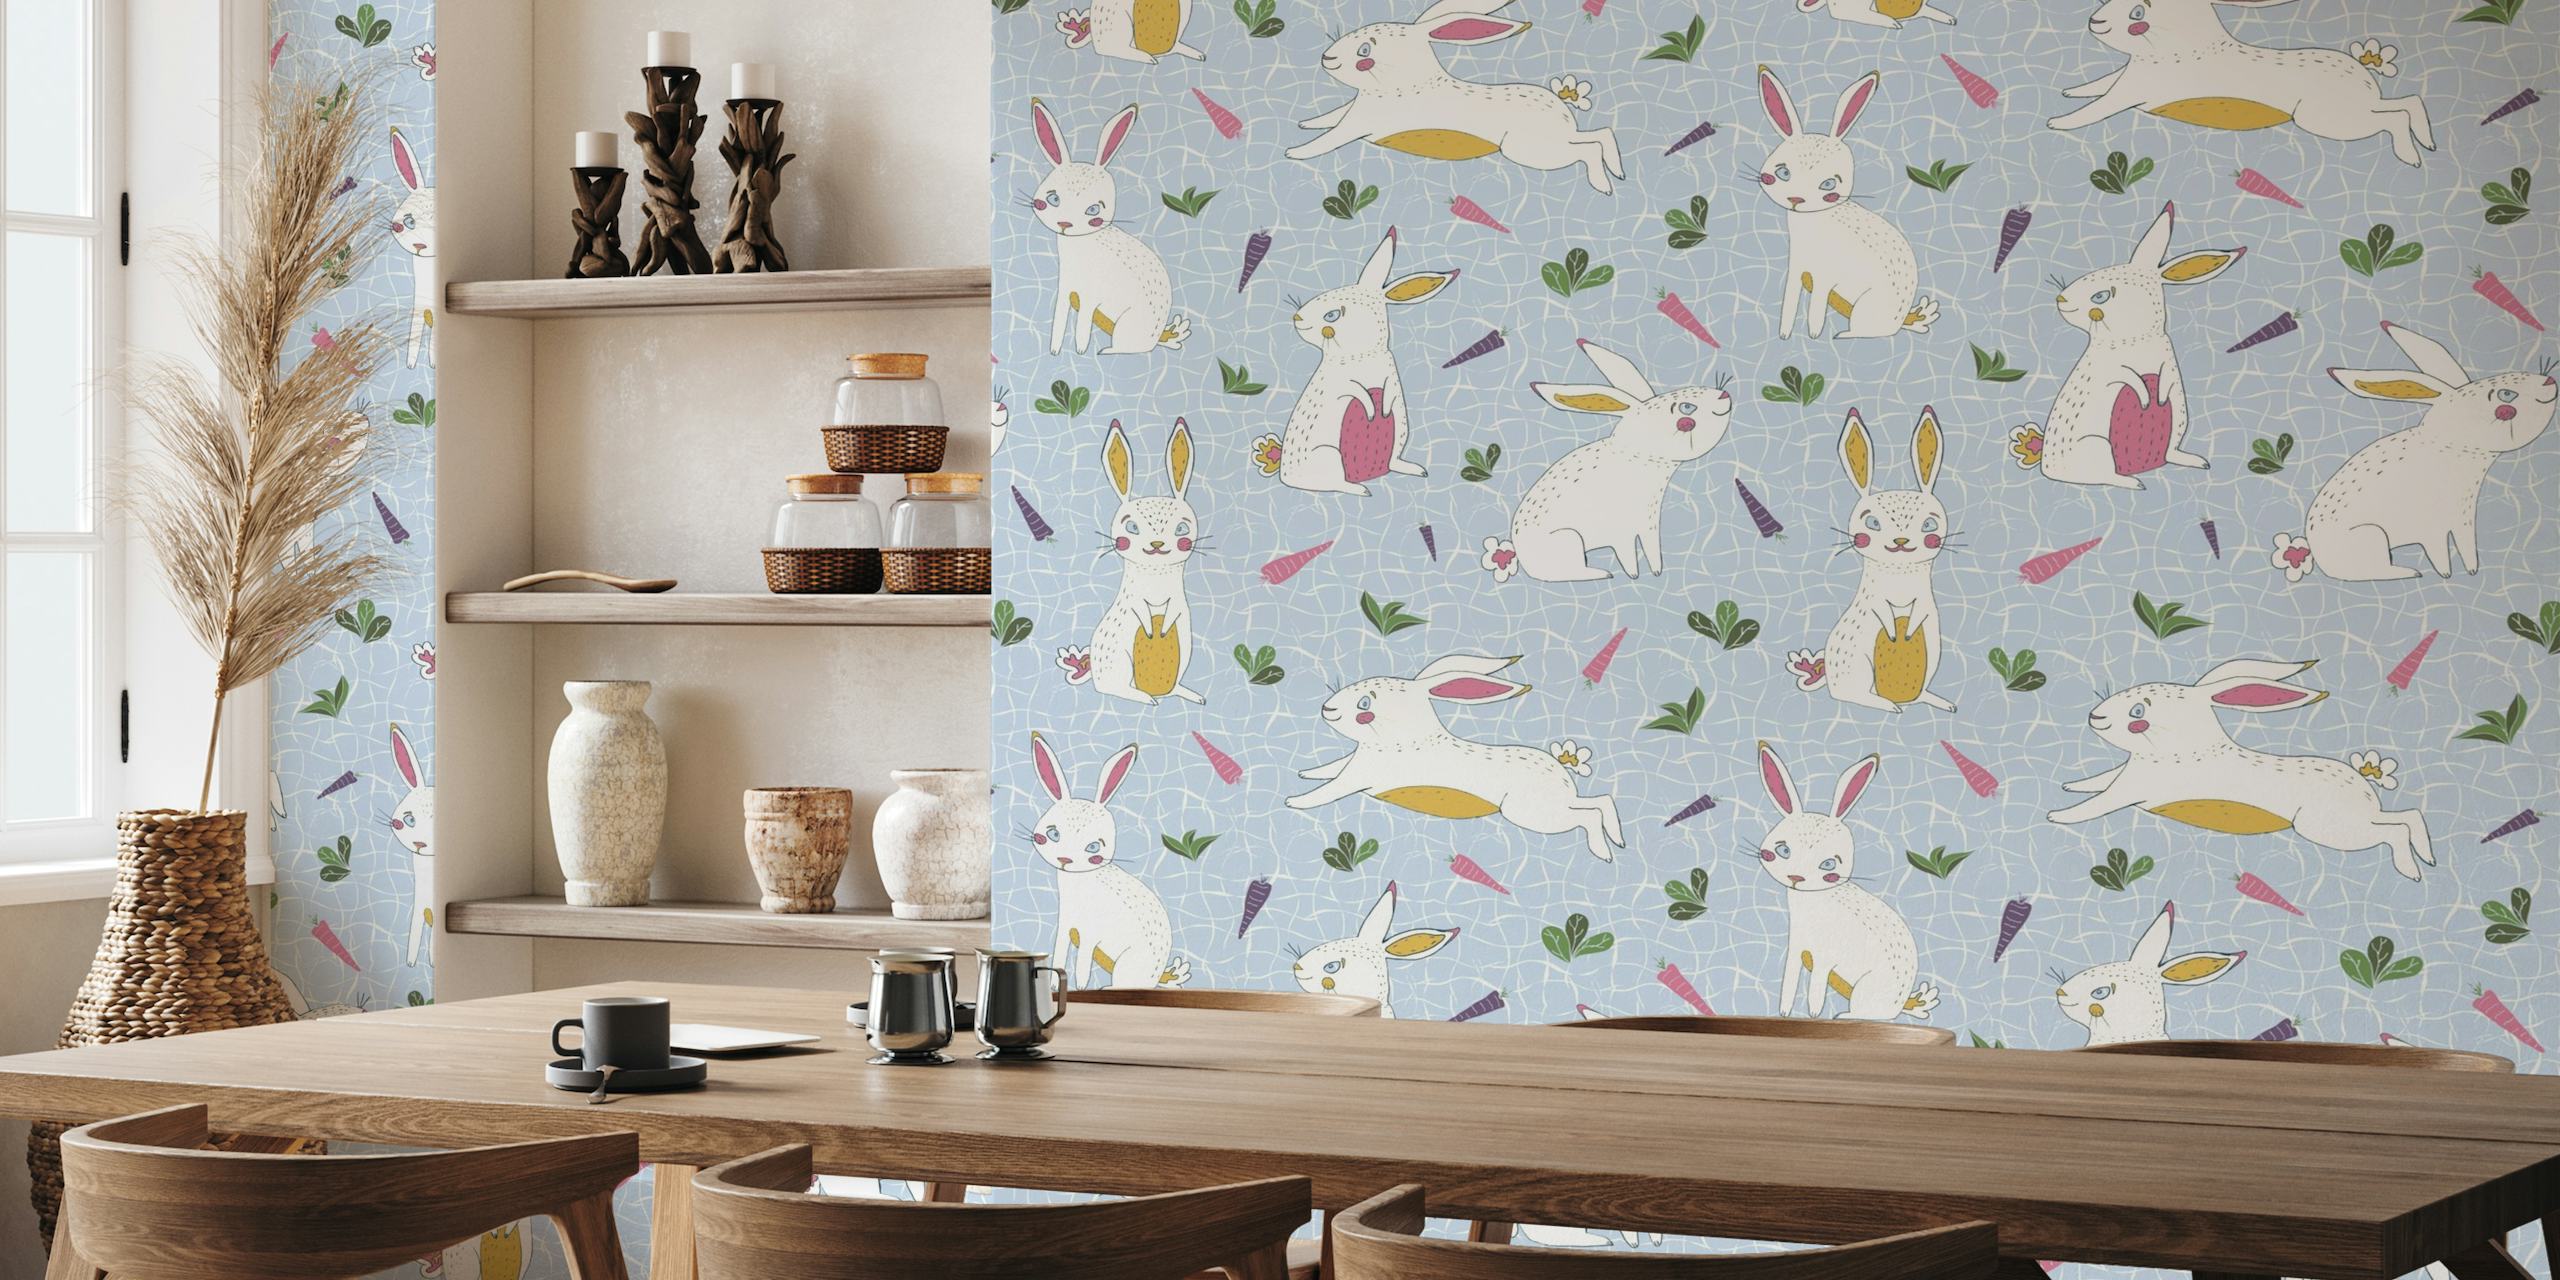 Happy bunnies playing and eating in nature papel pintado